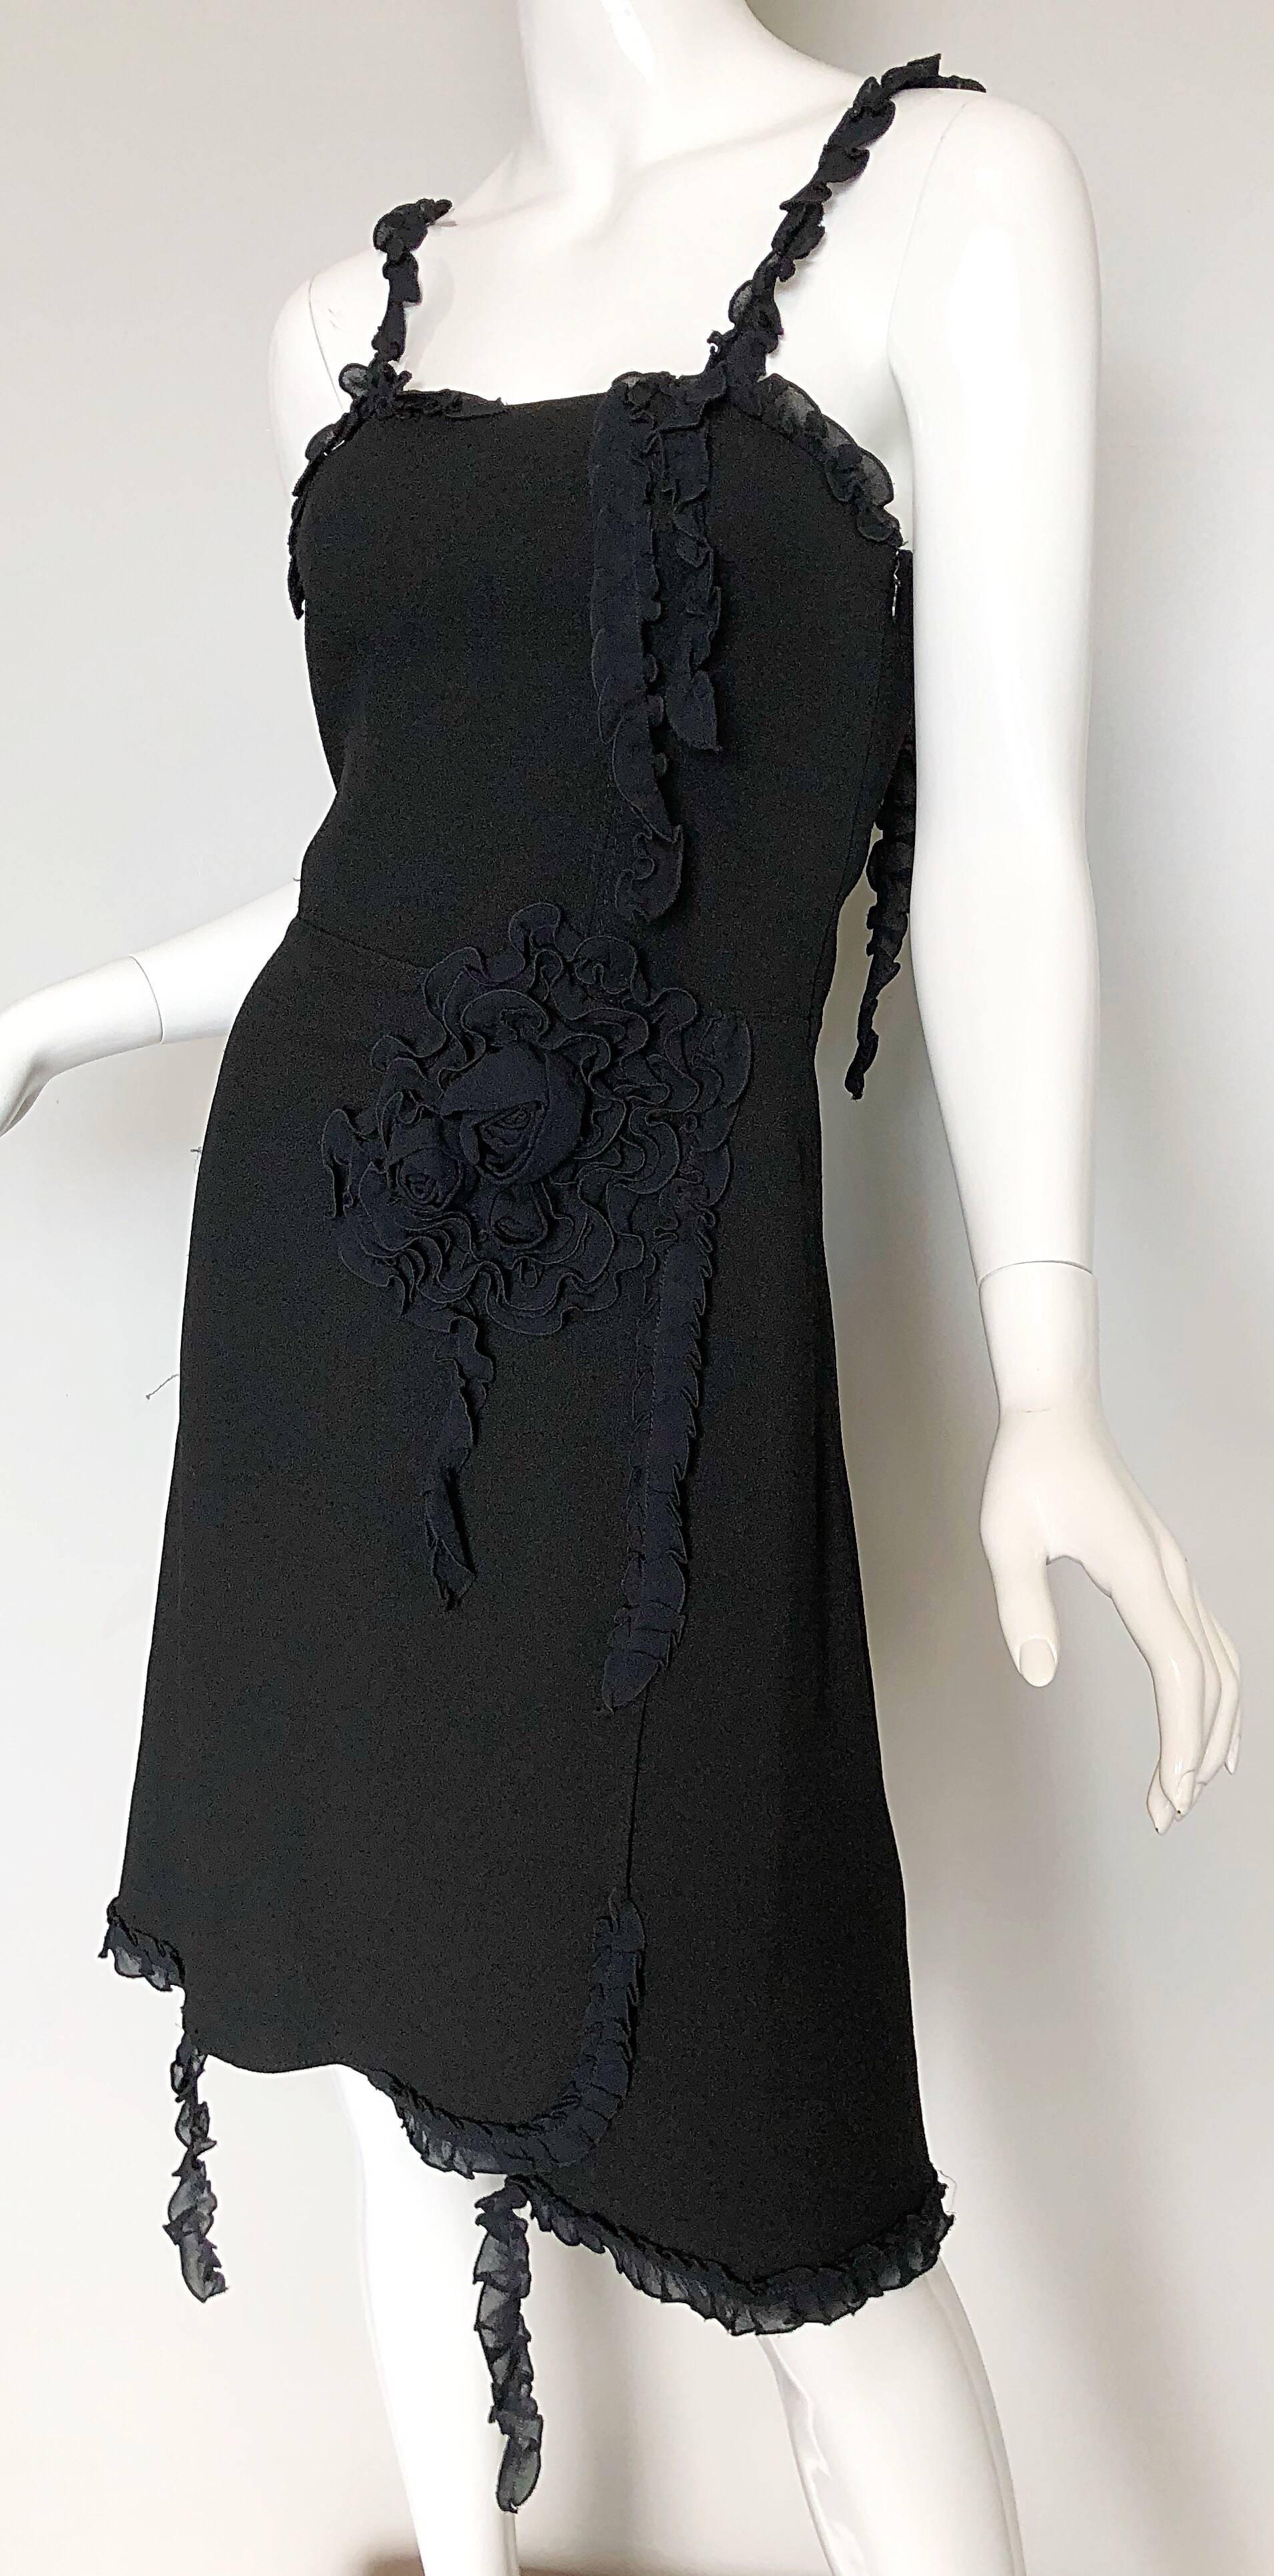 1990s Moschino Cheap & Chic Avant Garde Vintage 90s Little Black Dress In Excellent Condition For Sale In San Diego, CA